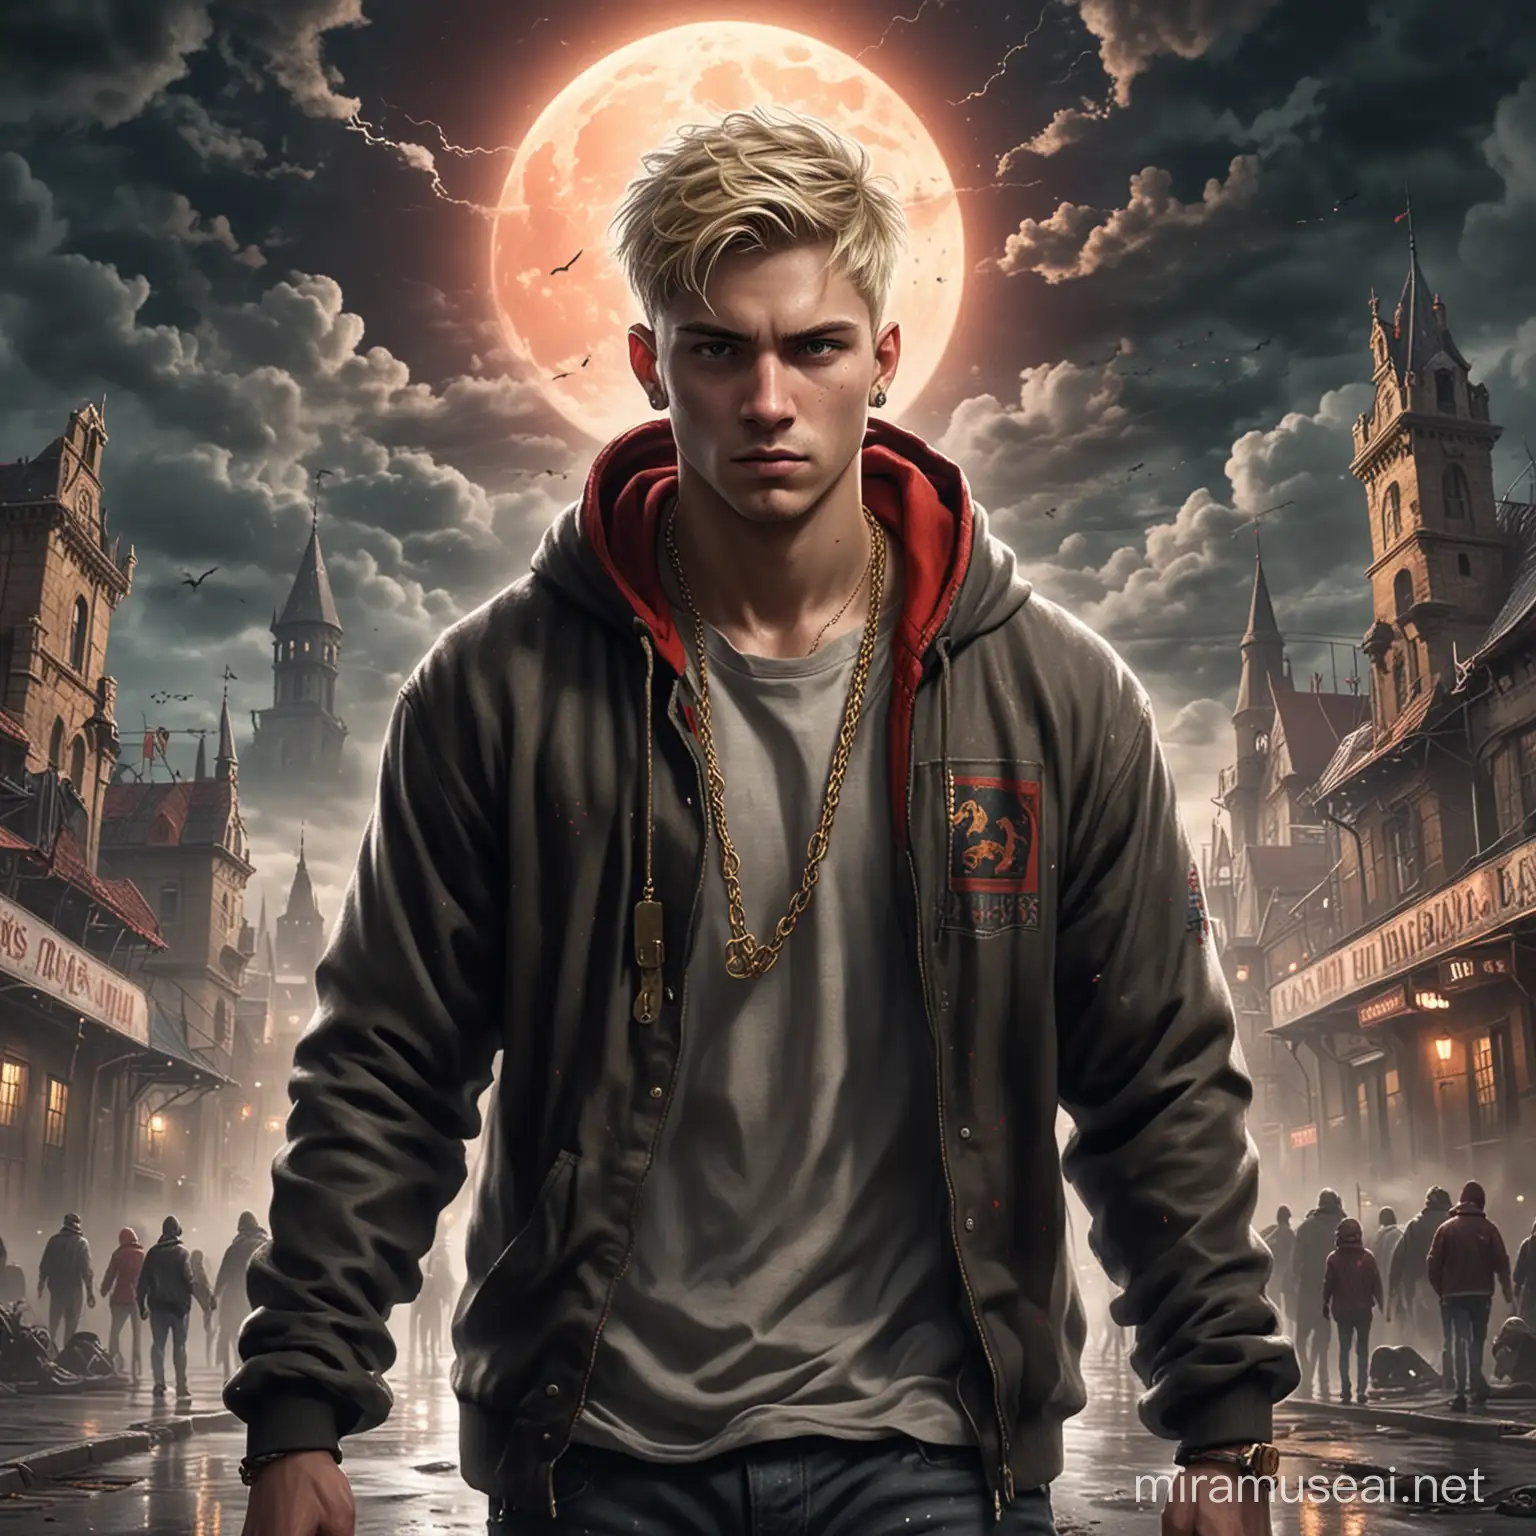 Blond Male Survivor Amidst Zombie Apocalypse with Approaching Storm